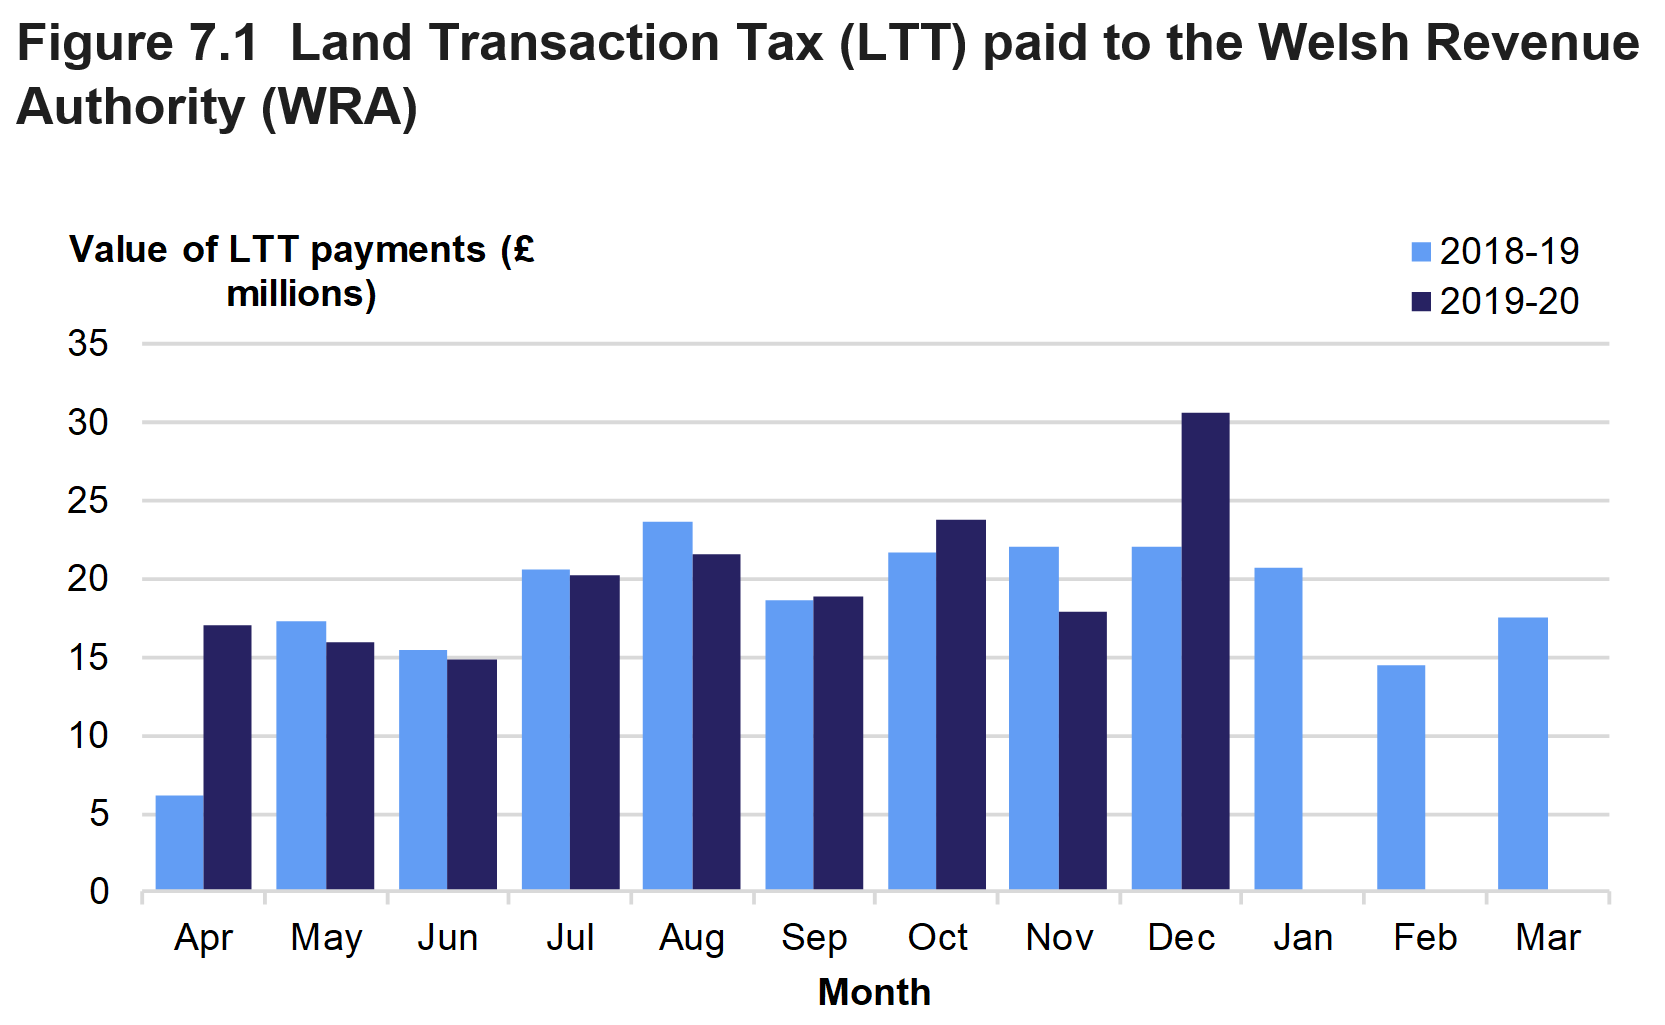 Figure 7.1 shows the monthly amounts of Land Transaction Tax paid to the Welsh Revenue Authority, for April 2018 to September 2019.